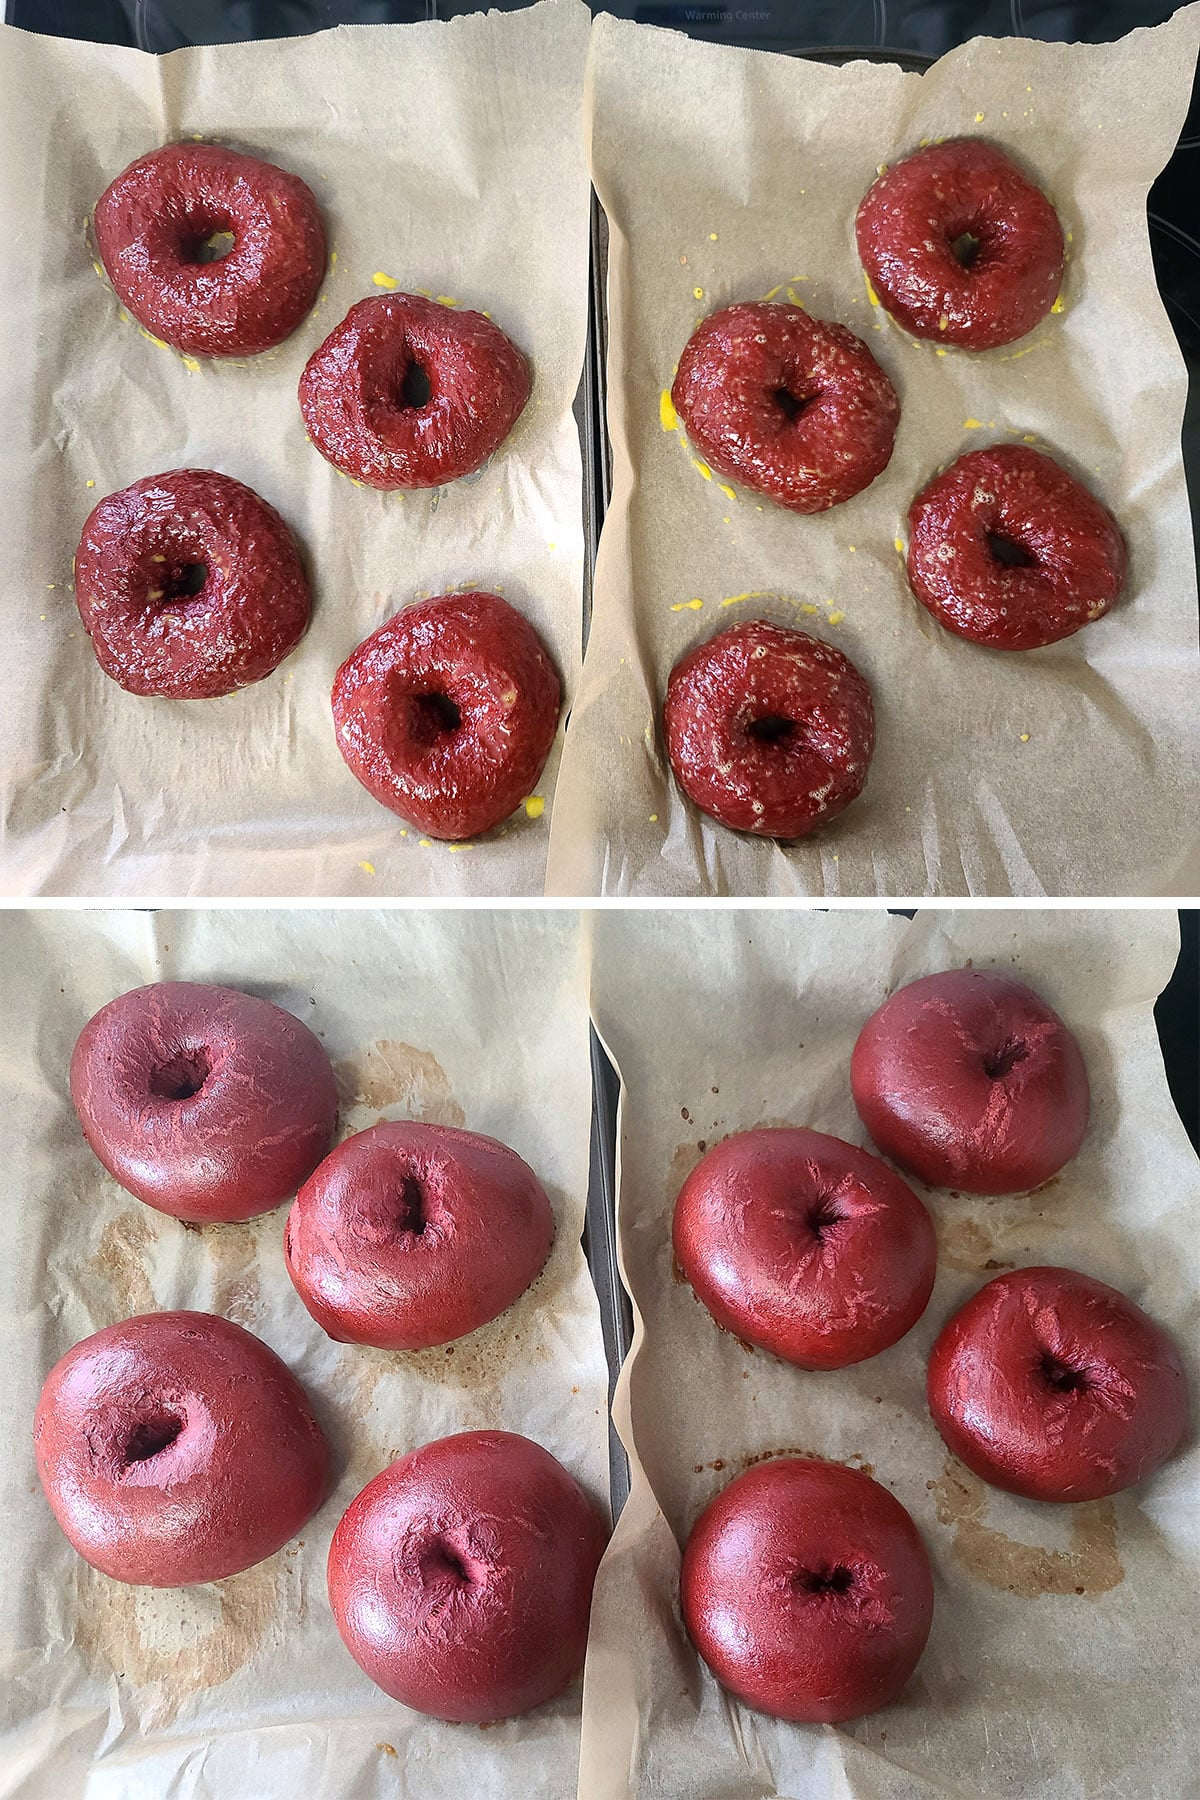 A 2 part image showing the 2 pans of red velvet bagels, before and after baking.